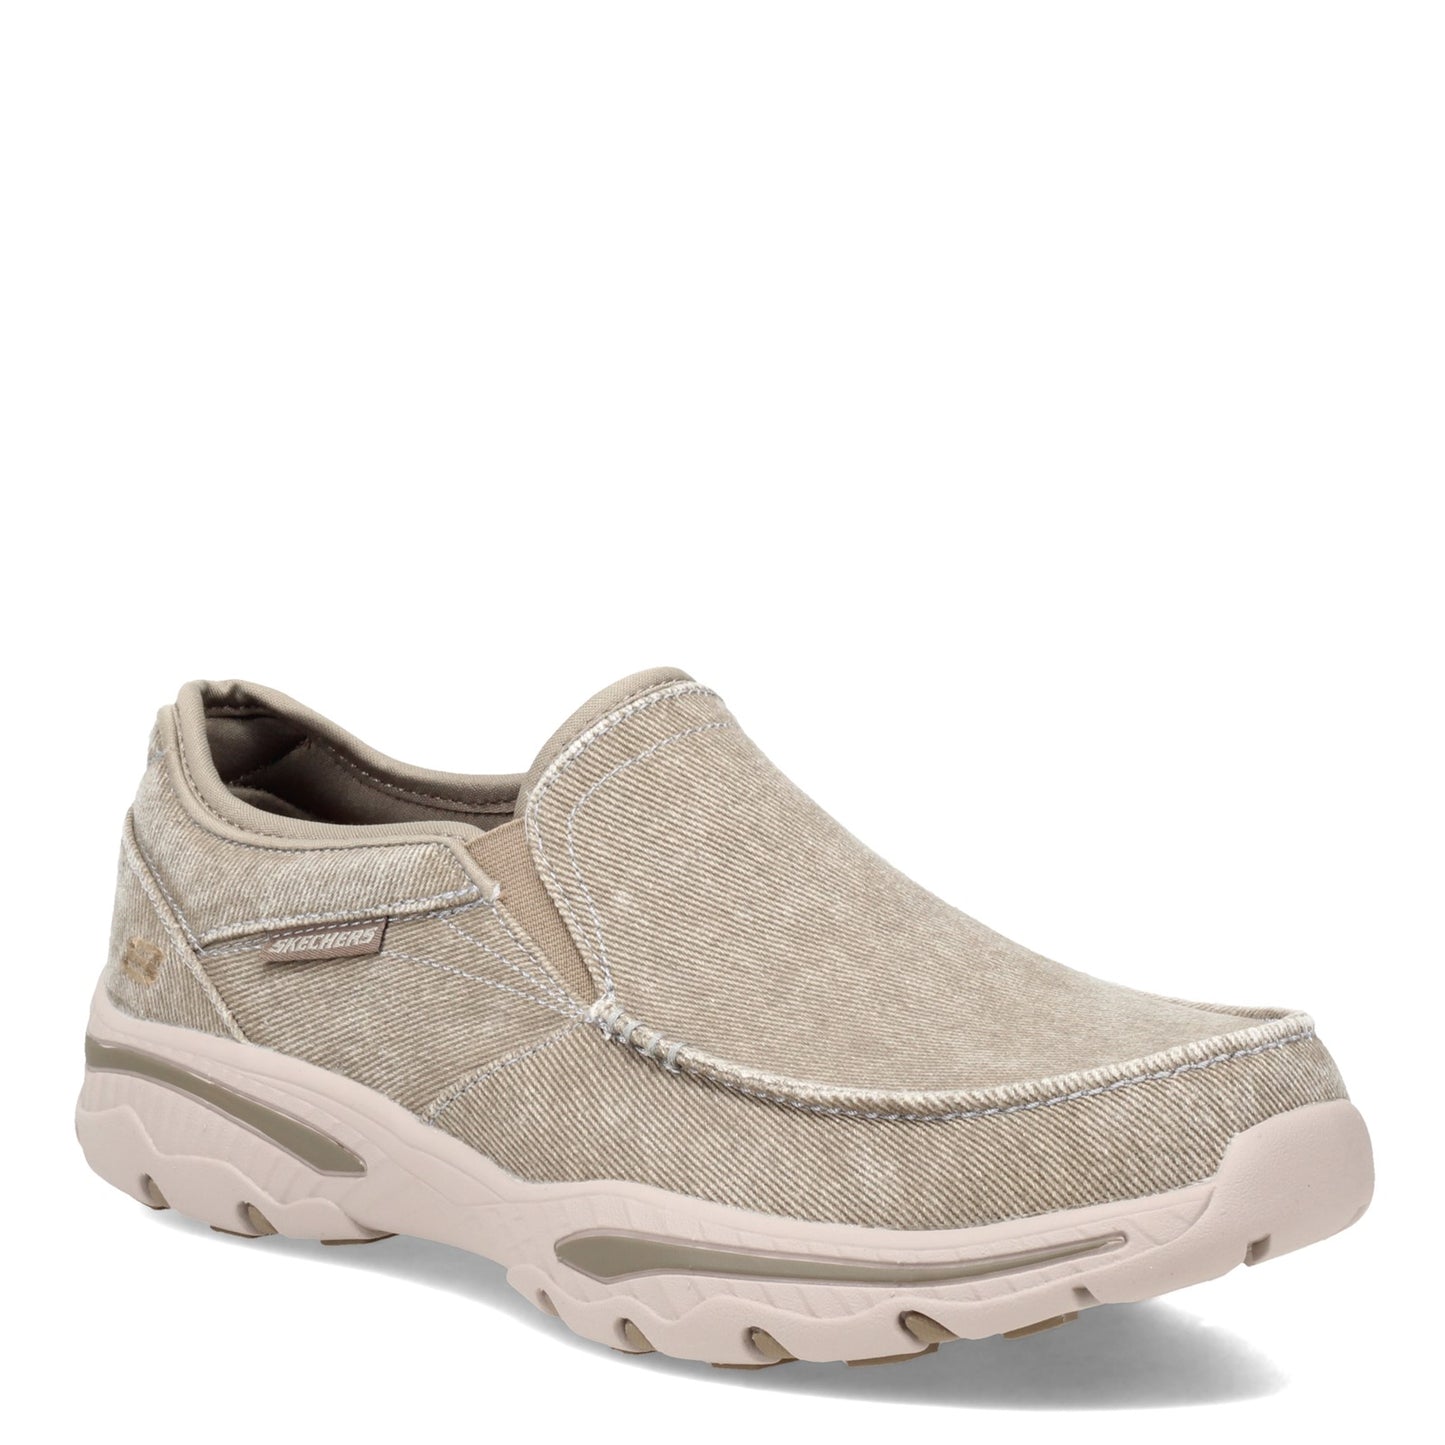 Peltz Shoes  Men's Skechers Relaxed Fit Creston Moseco Slip-On TAUPE 65355-TPE